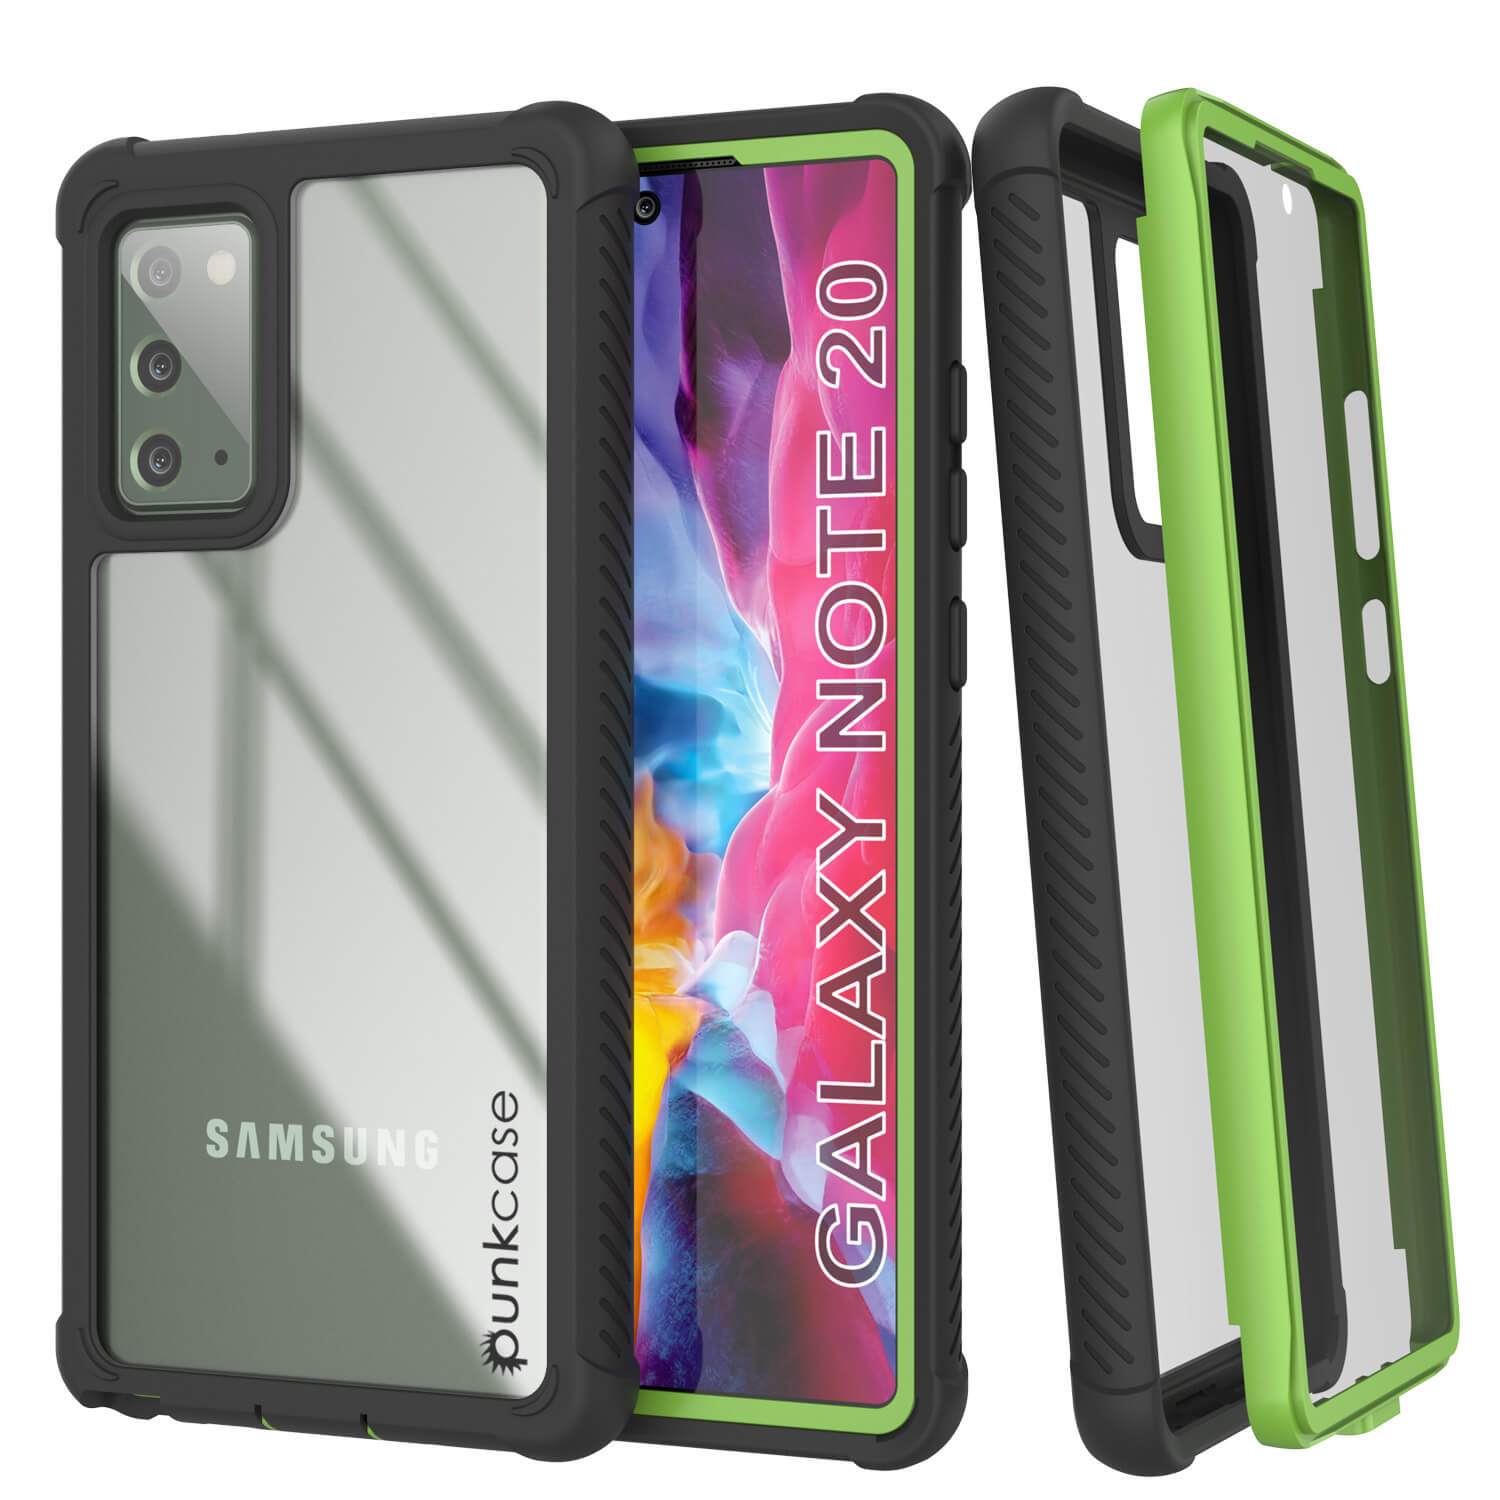 Punkcase Galaxy Note 20 Case, [Spartan Series] Light Green Rugged Heavy Duty Cover W/Built in Screen Protector